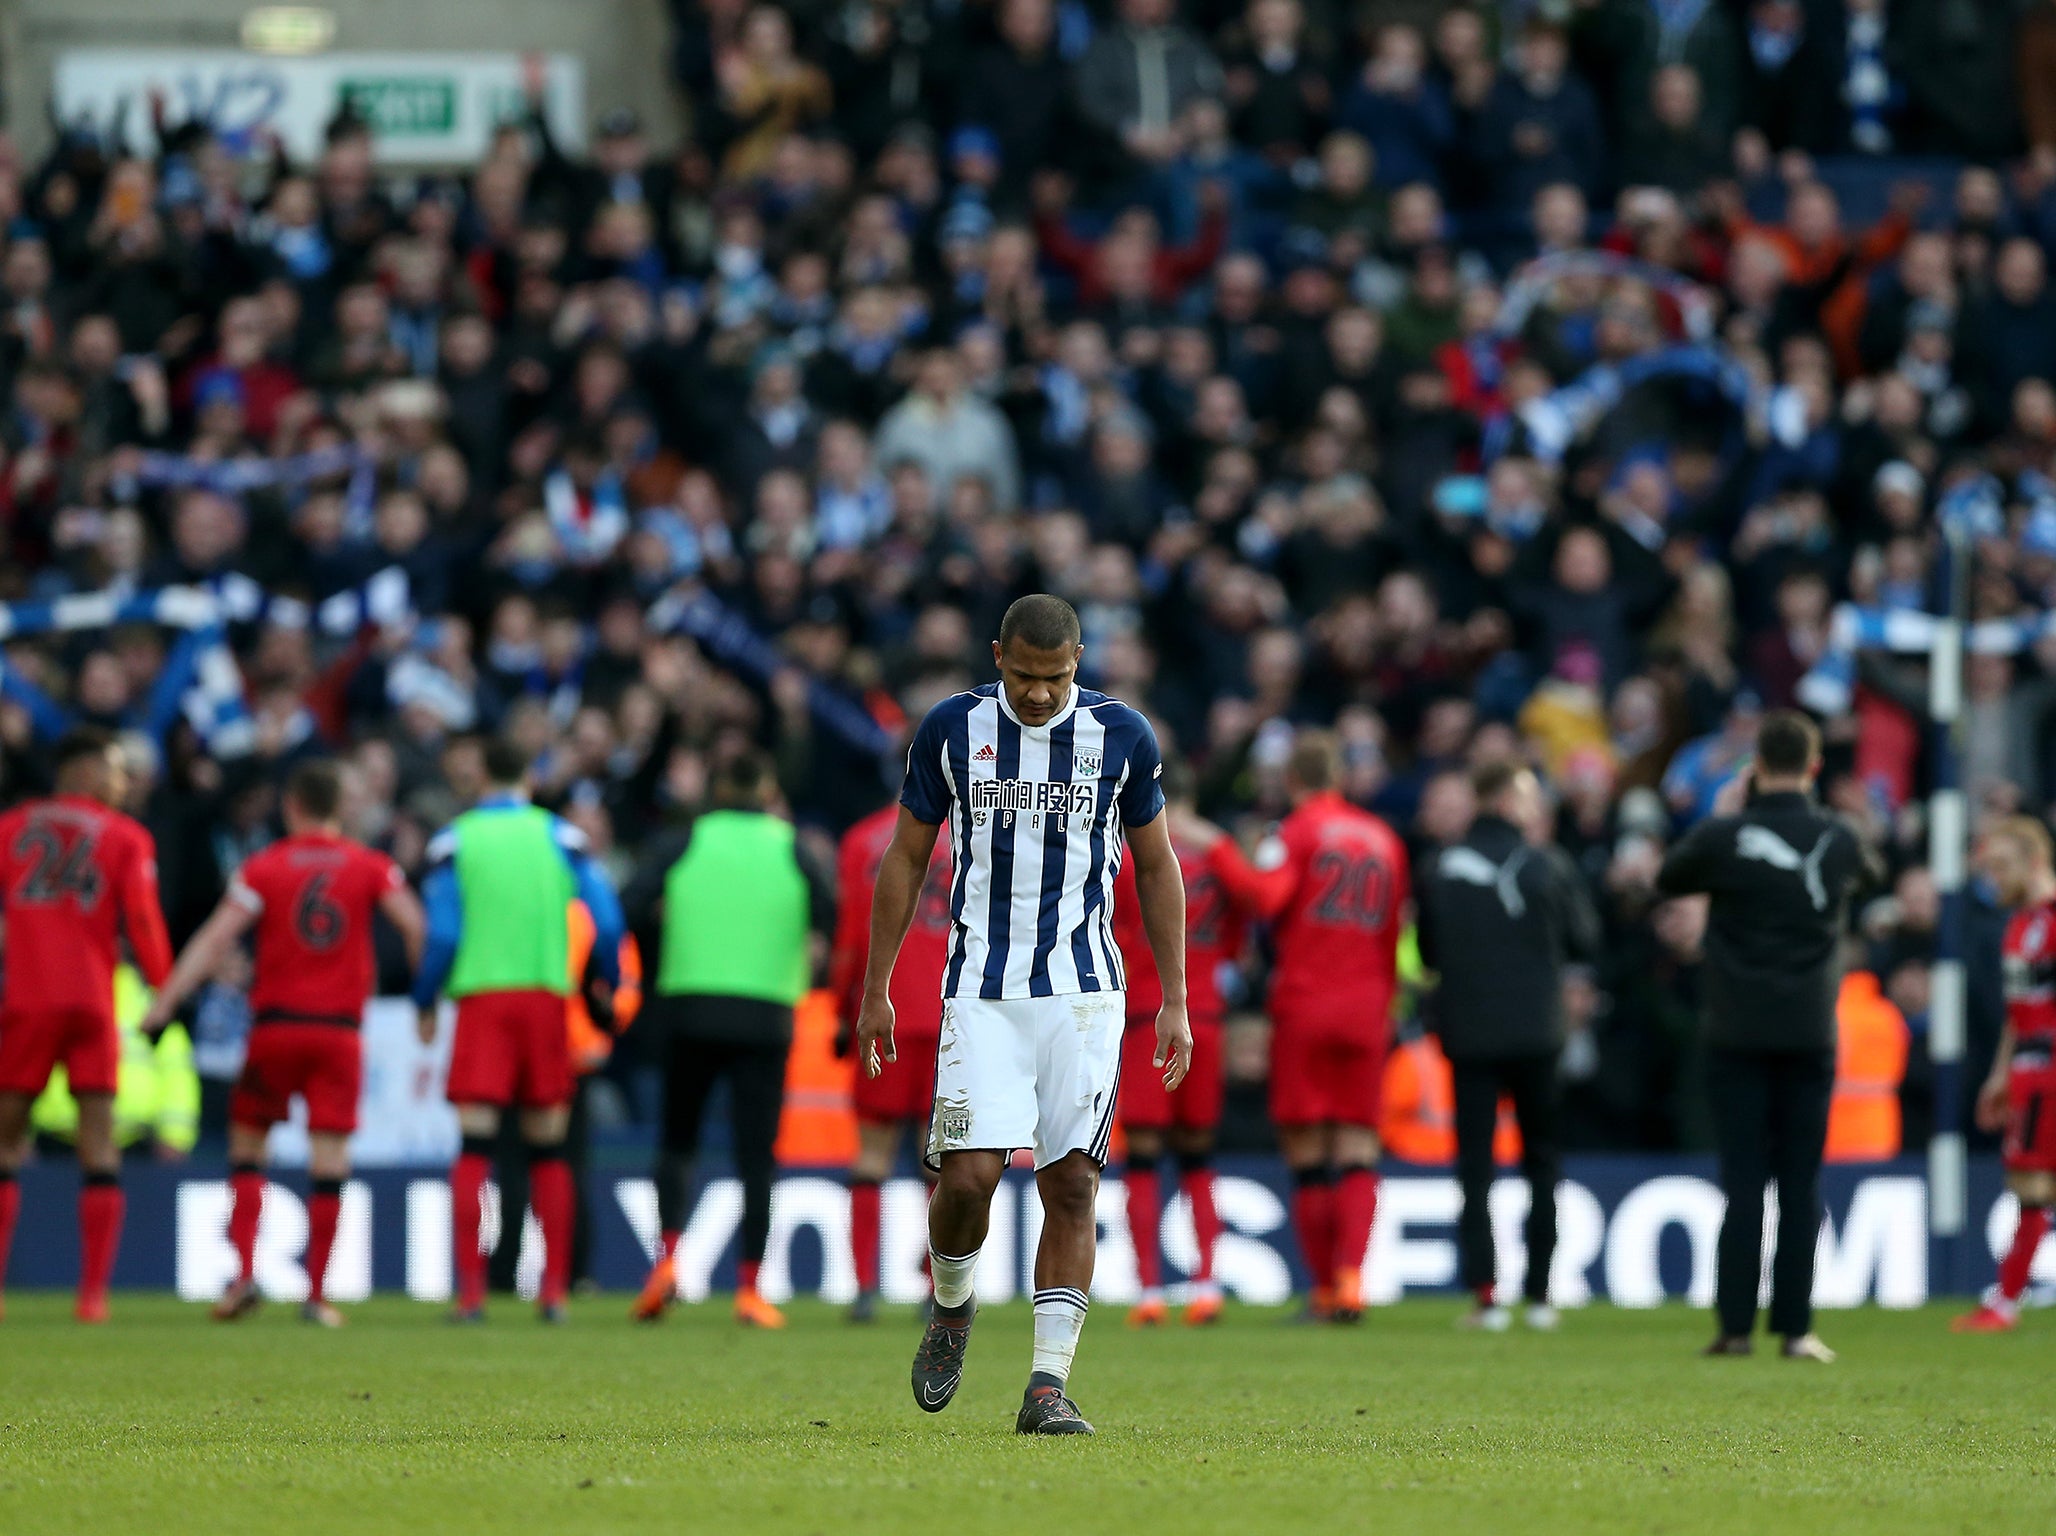 West Brom are now seven points adrift at the bottom